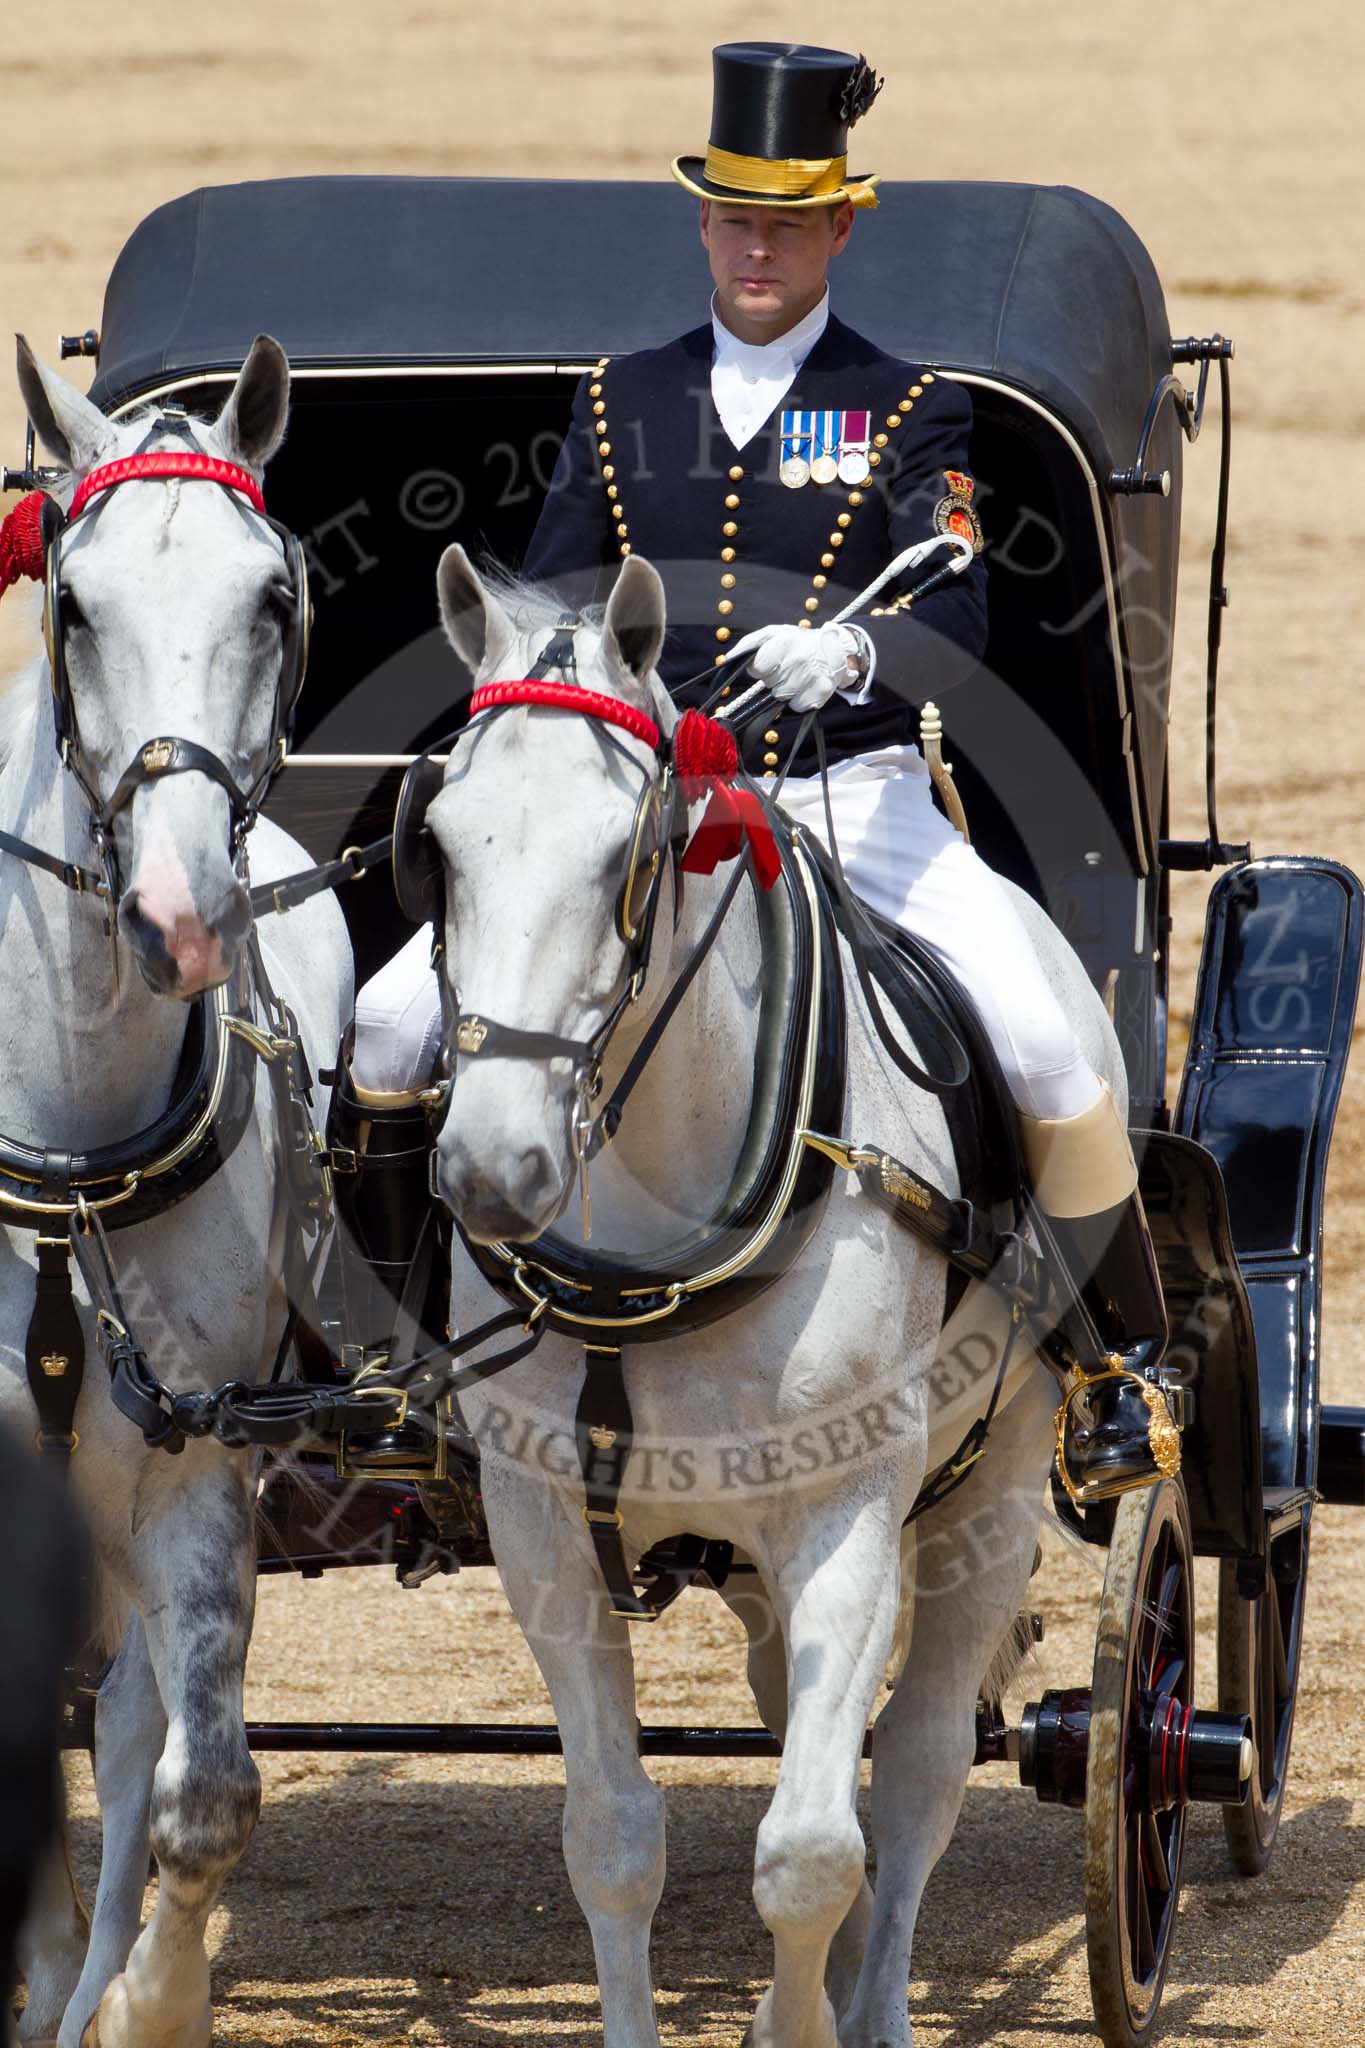 The Colonel's Review 2011: Head-Coachman Jack Hargreaves with the two Windsor Grey horses..
Horse Guards Parade, Westminster,
London SW1,

United Kingdom,
on 04 June 2011 at 12:06, image #285